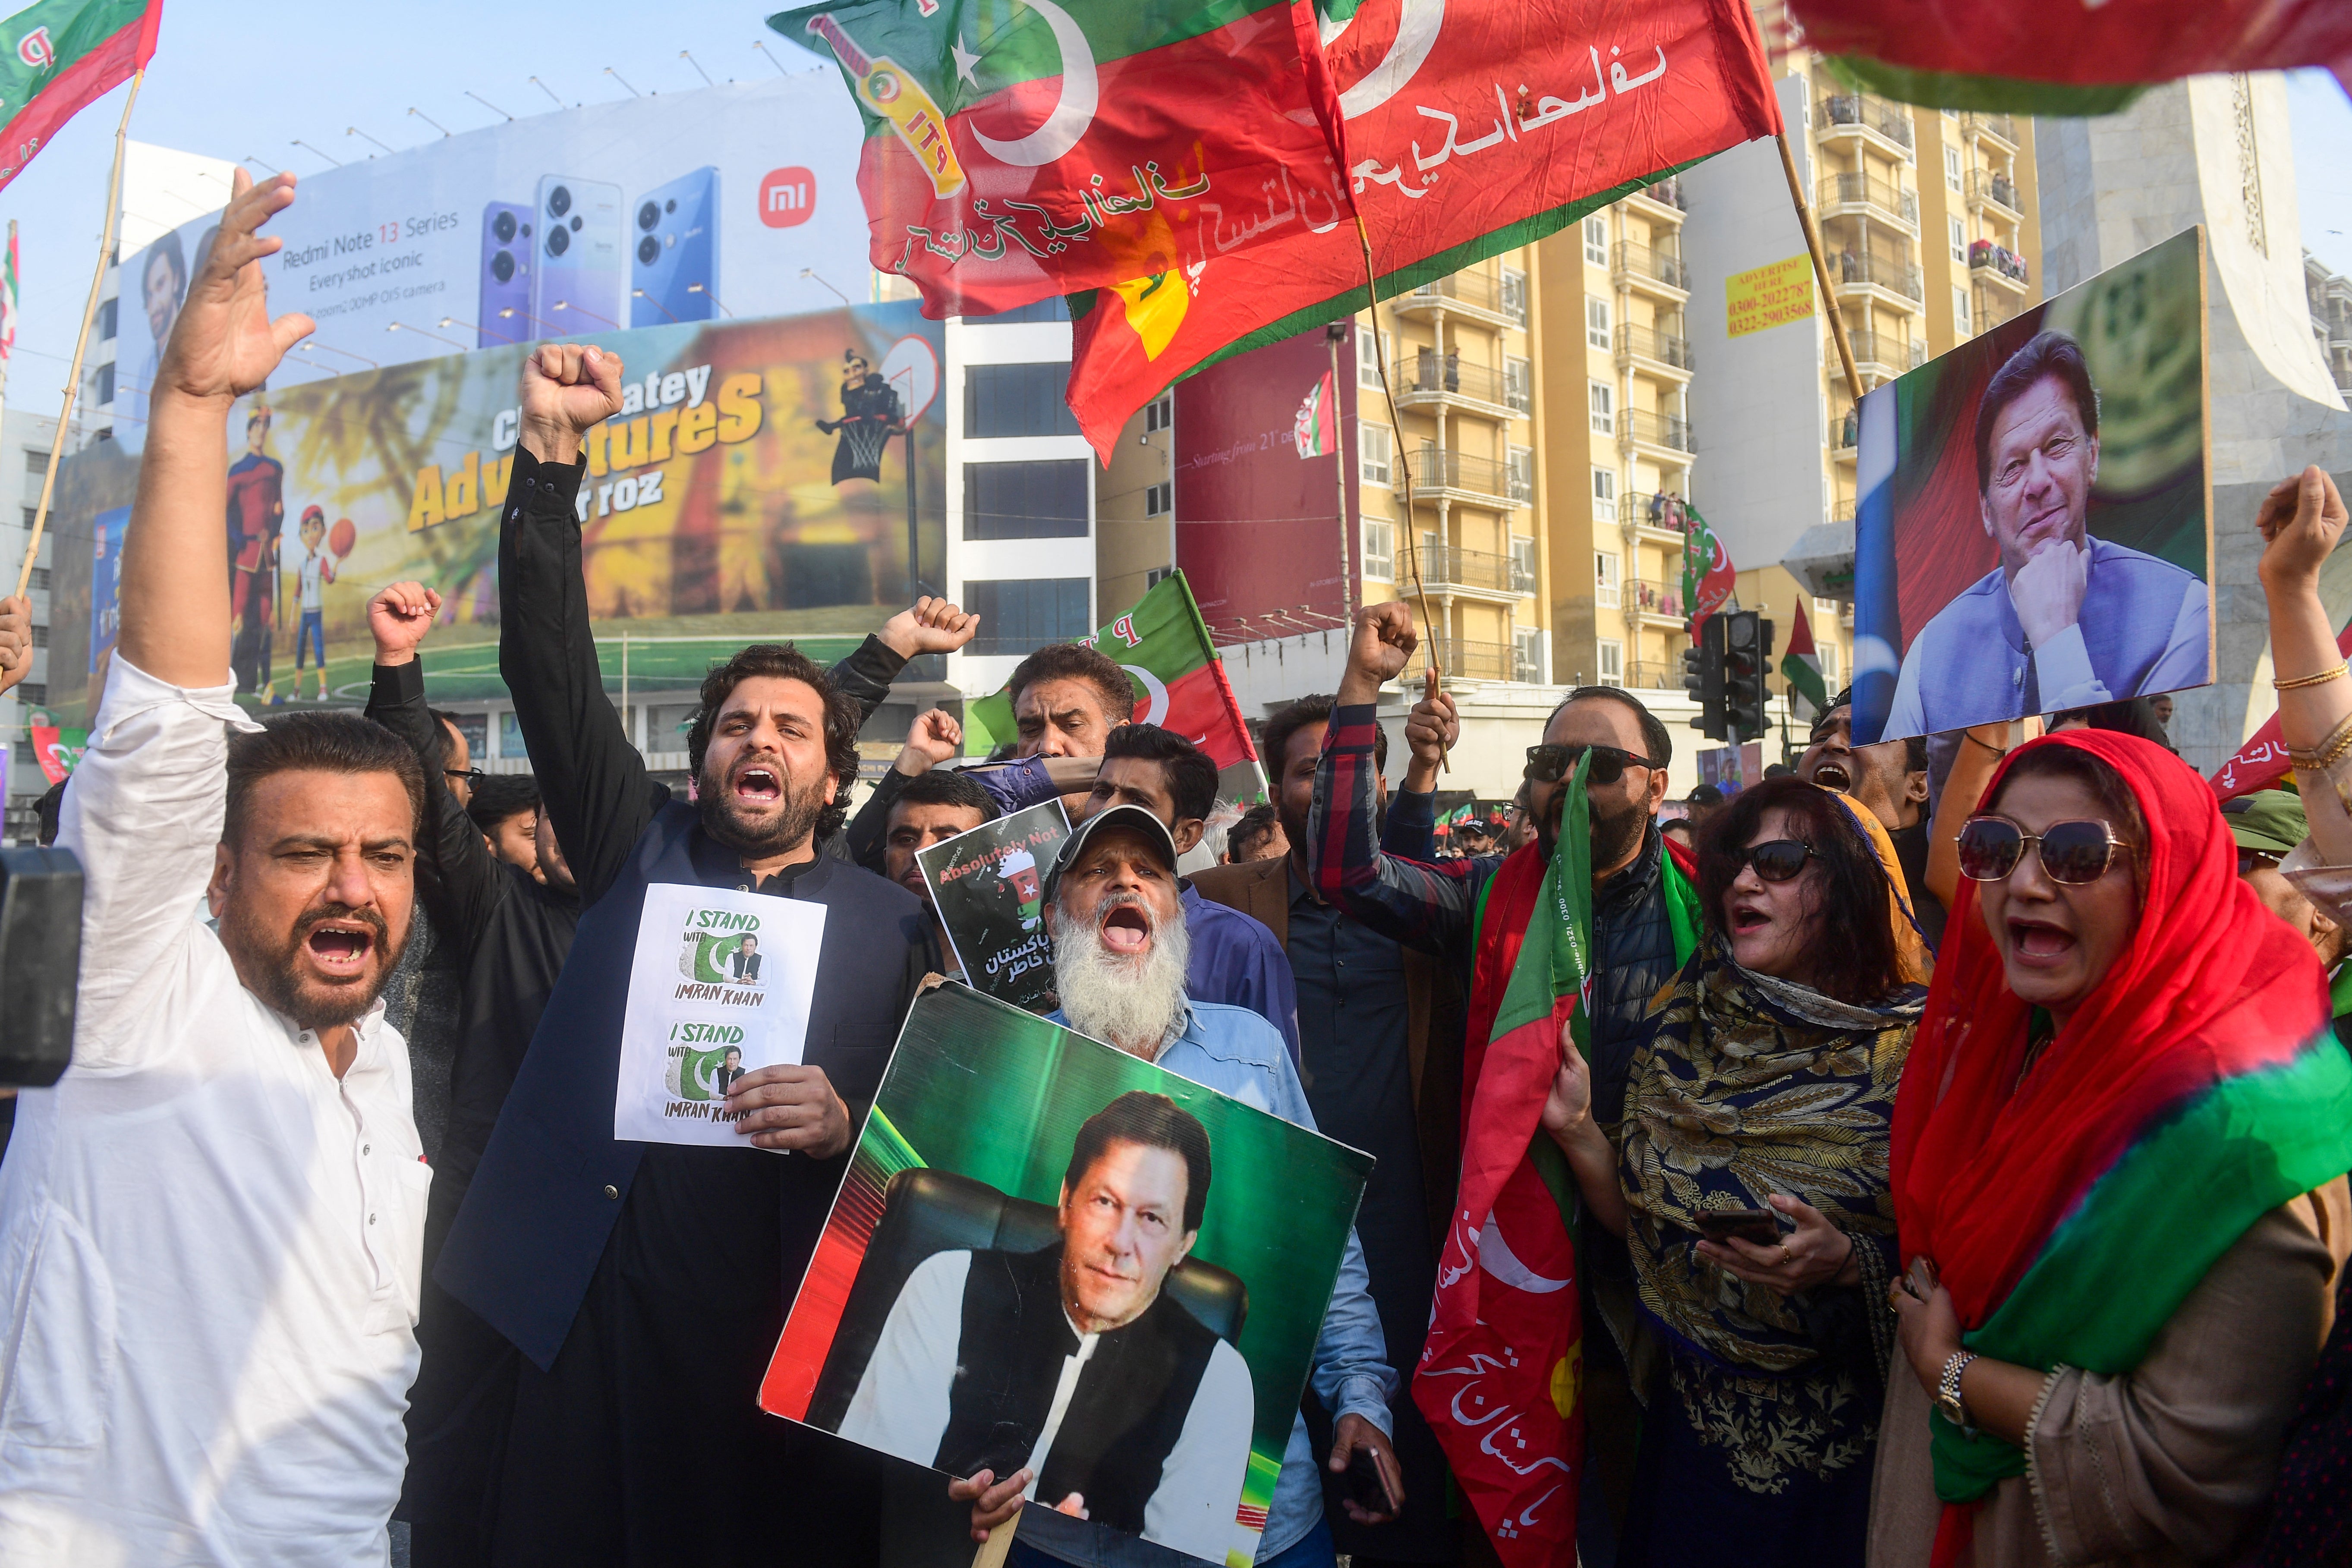 Supporters of Pakistan Tehreek-e-Insaf (PTI) party shout slogans and protest to demand the release of Pakistan's jailed former prime minister Imran Khan